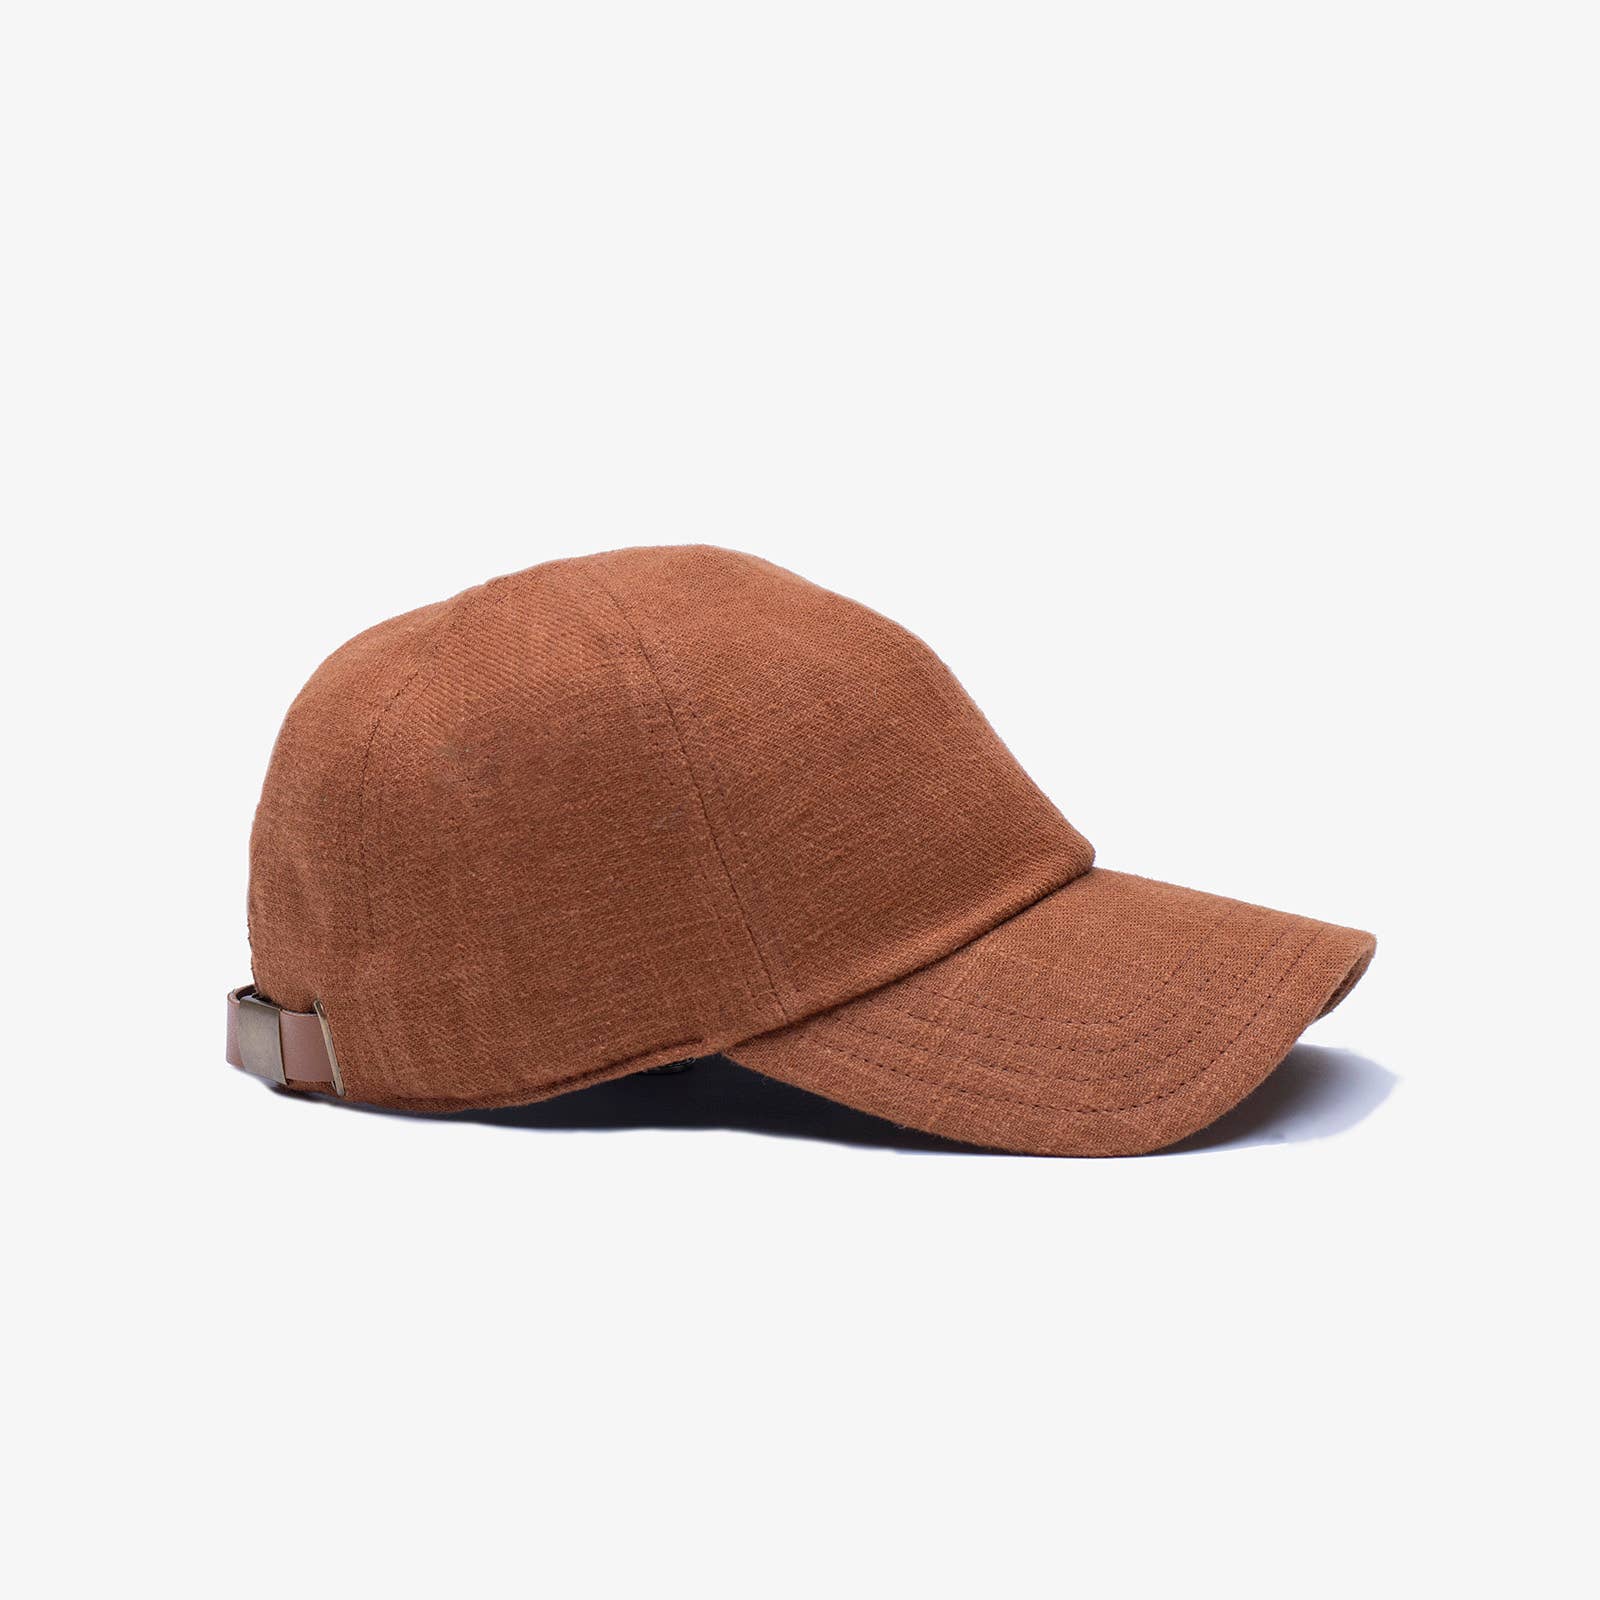 Storied Hats Wholesale Products | Buy with Free Returns on Faire.com